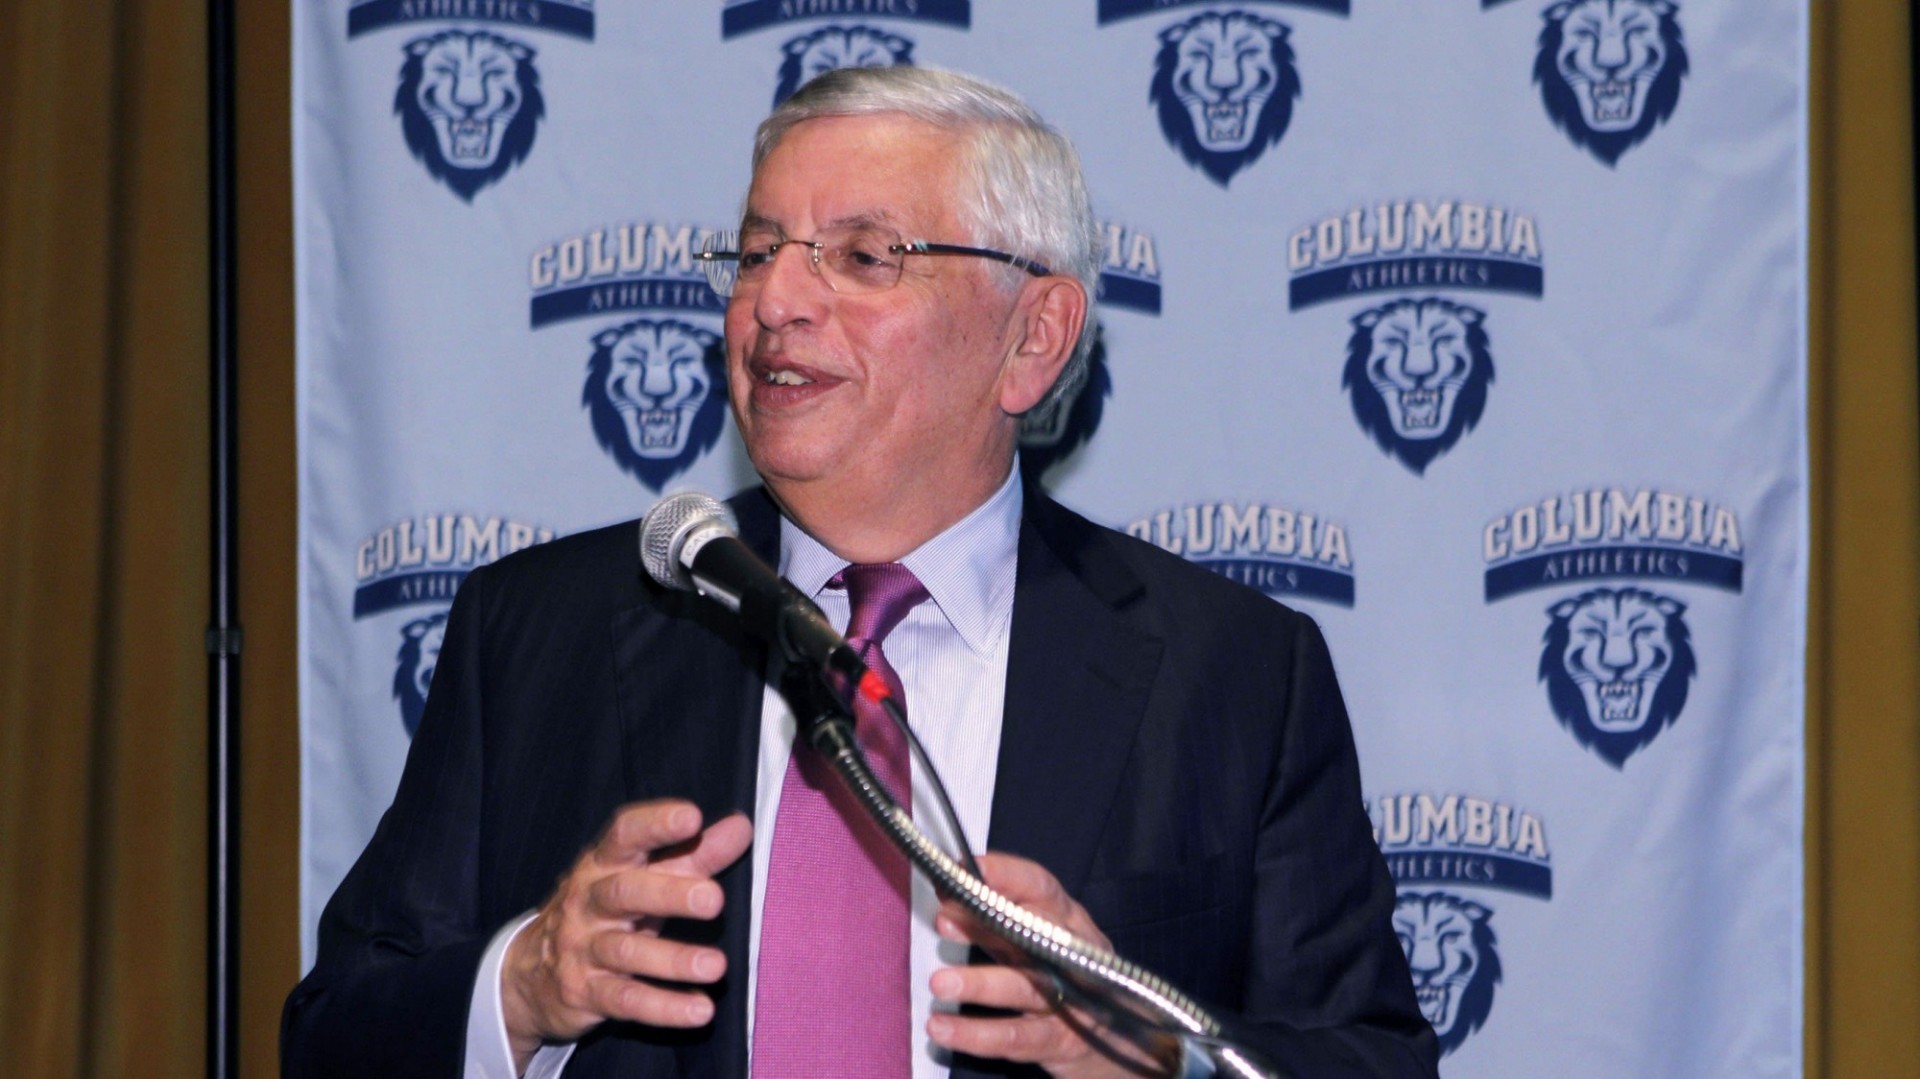 Photo of David Stern in a navy blue suit, behind a microphone, in front of a poster that repeats Columbia Athletics